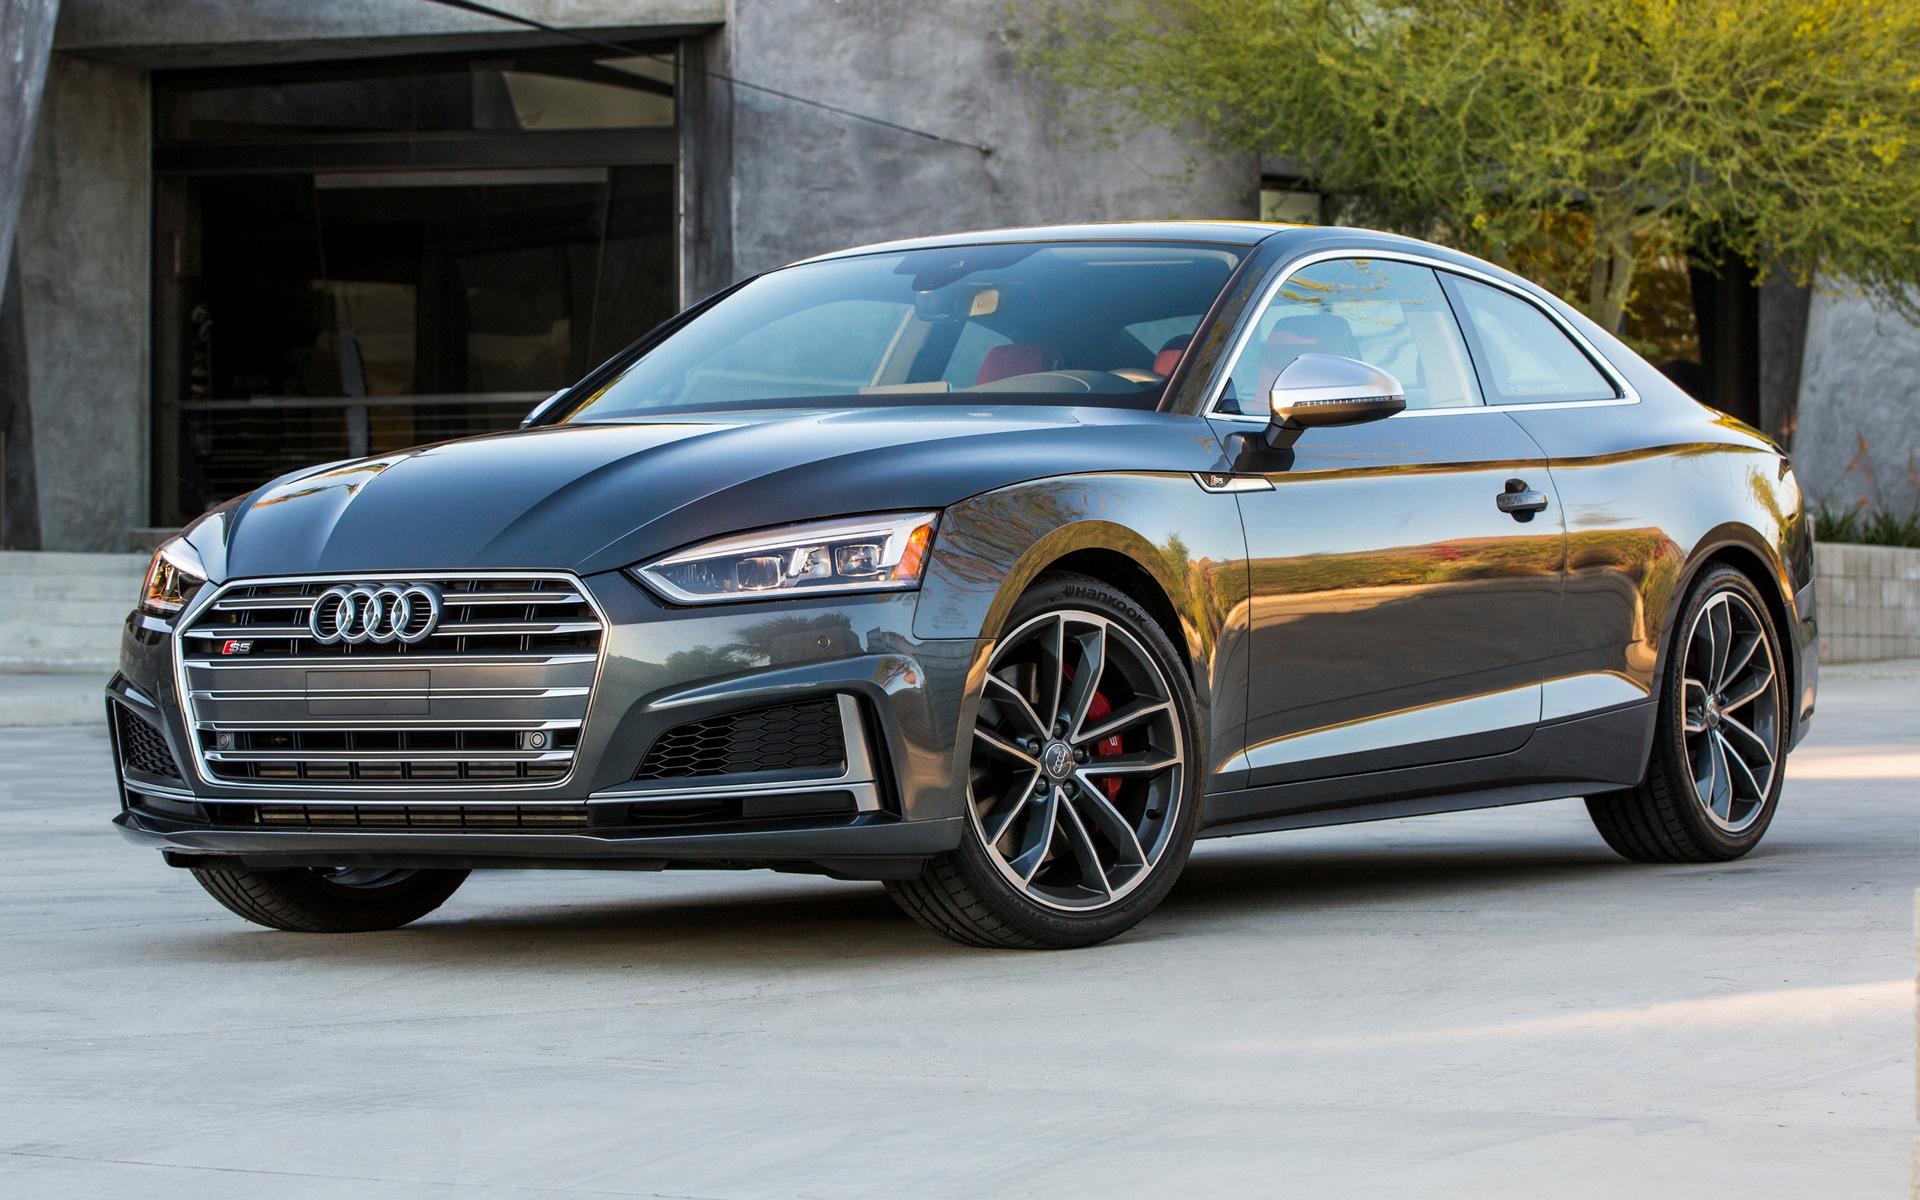 Audi S5 Coupe (US) and HD Image